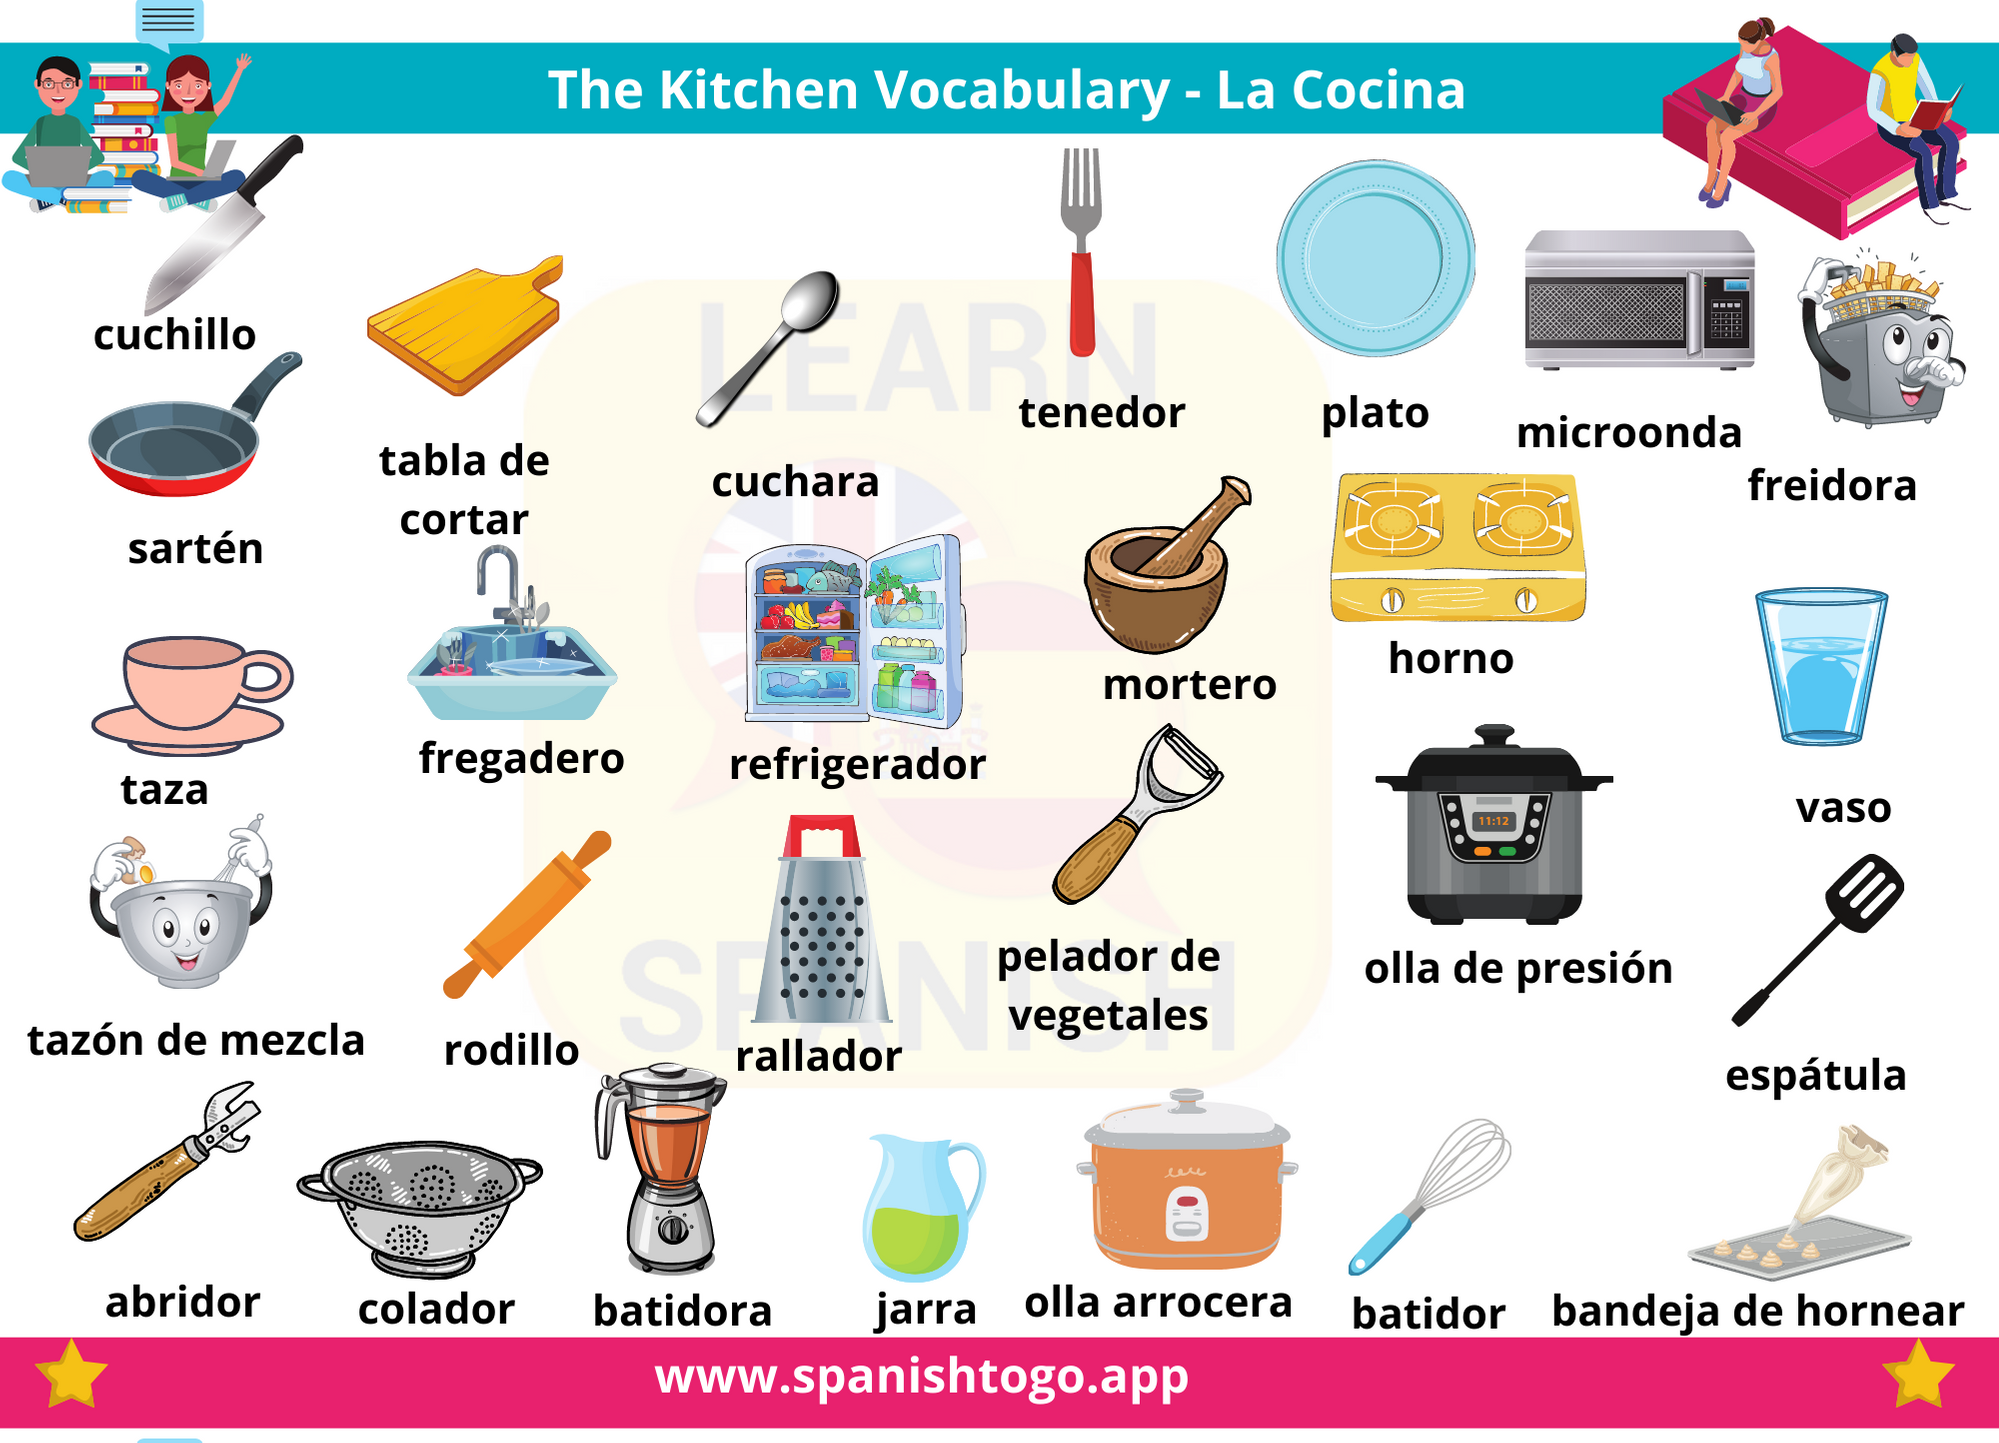 kitchen table items in spanish